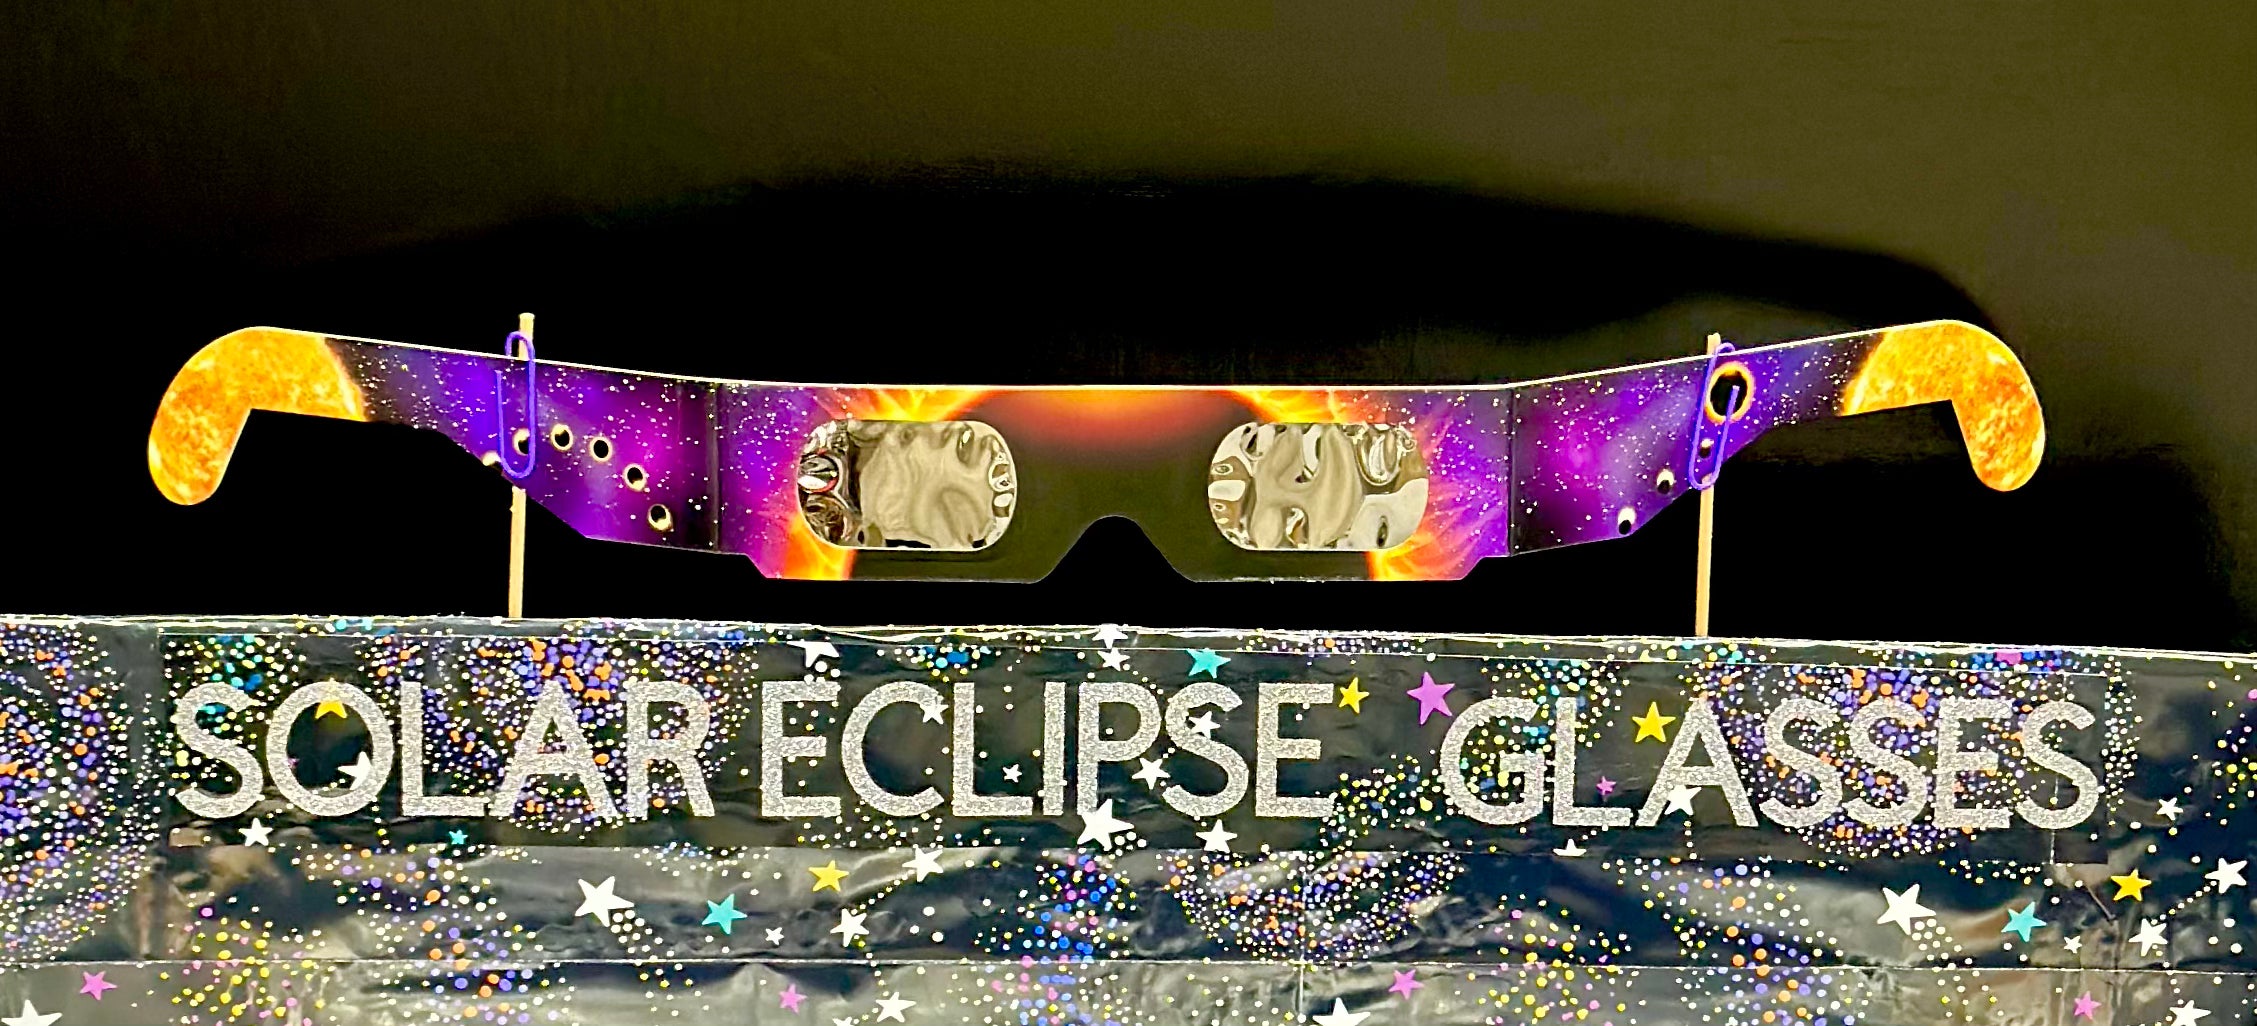 Grab Your Eclipse Glasses Now